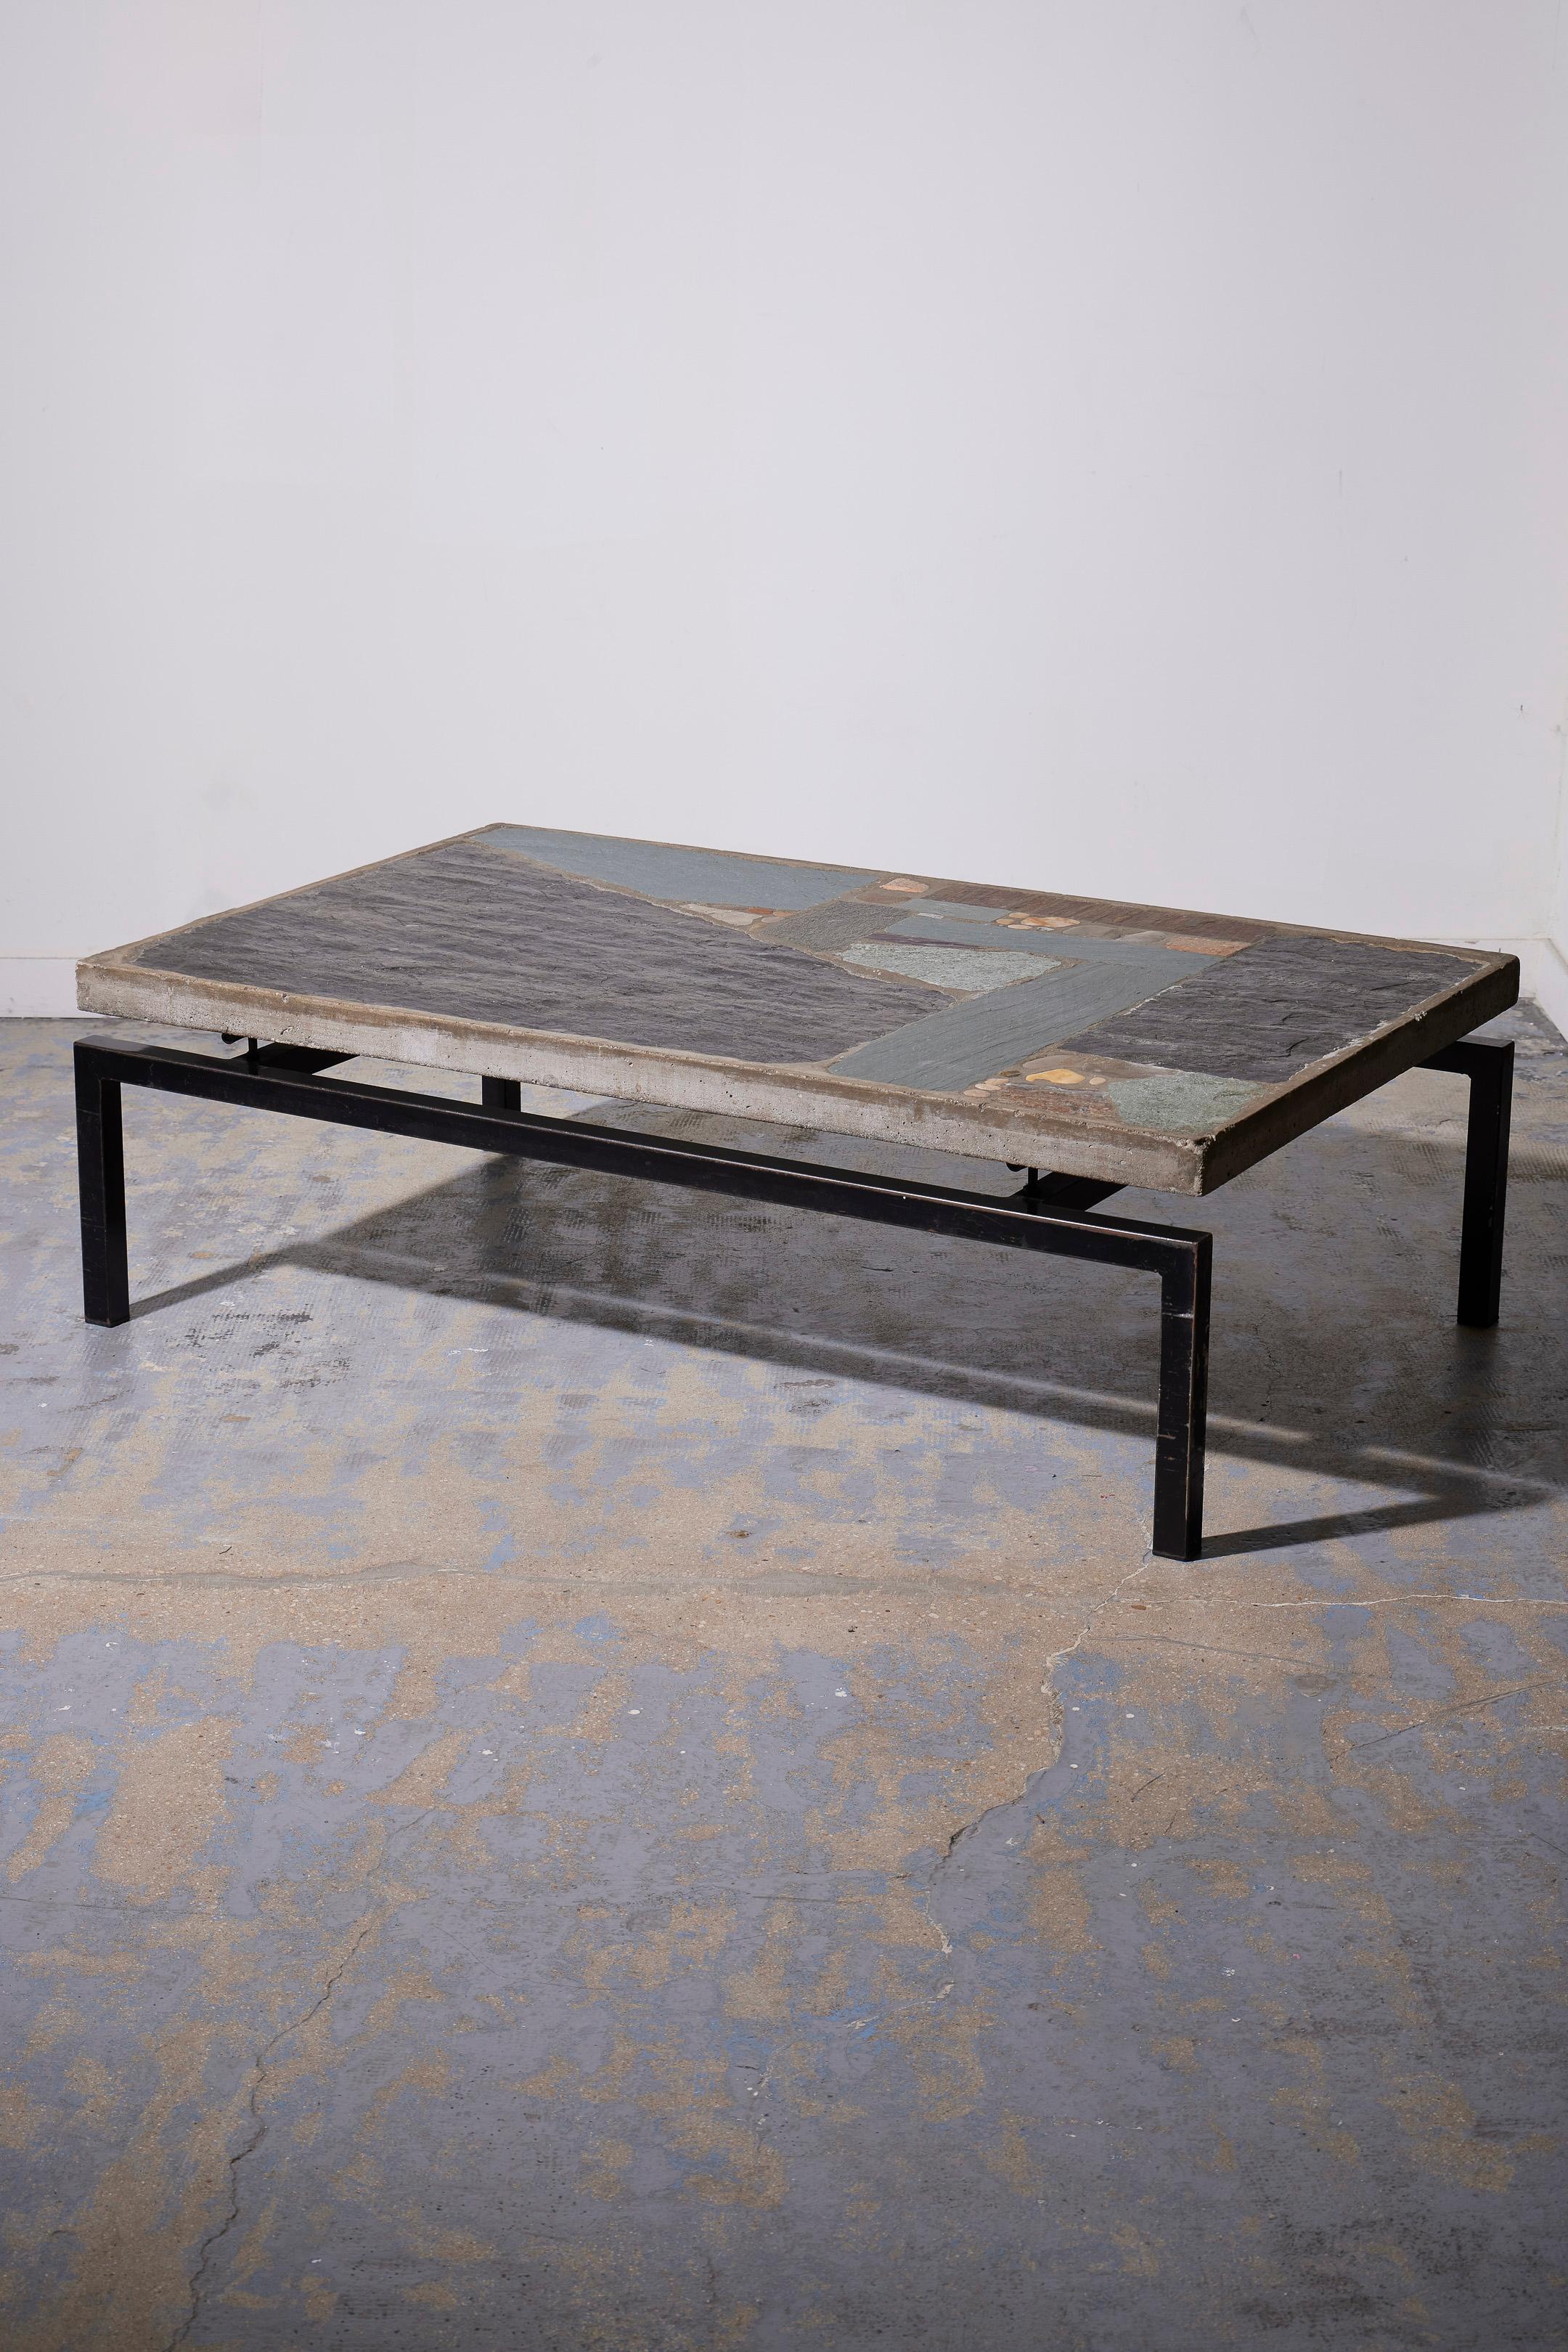 Coffee table by Dutch designer Paul Kingma (1931-2015) in the 1960s (1965). All his tables are unique creations. The table has a black metal structure supporting a floating concrete panel tabletop with inlays of slate and various stones. Beautiful